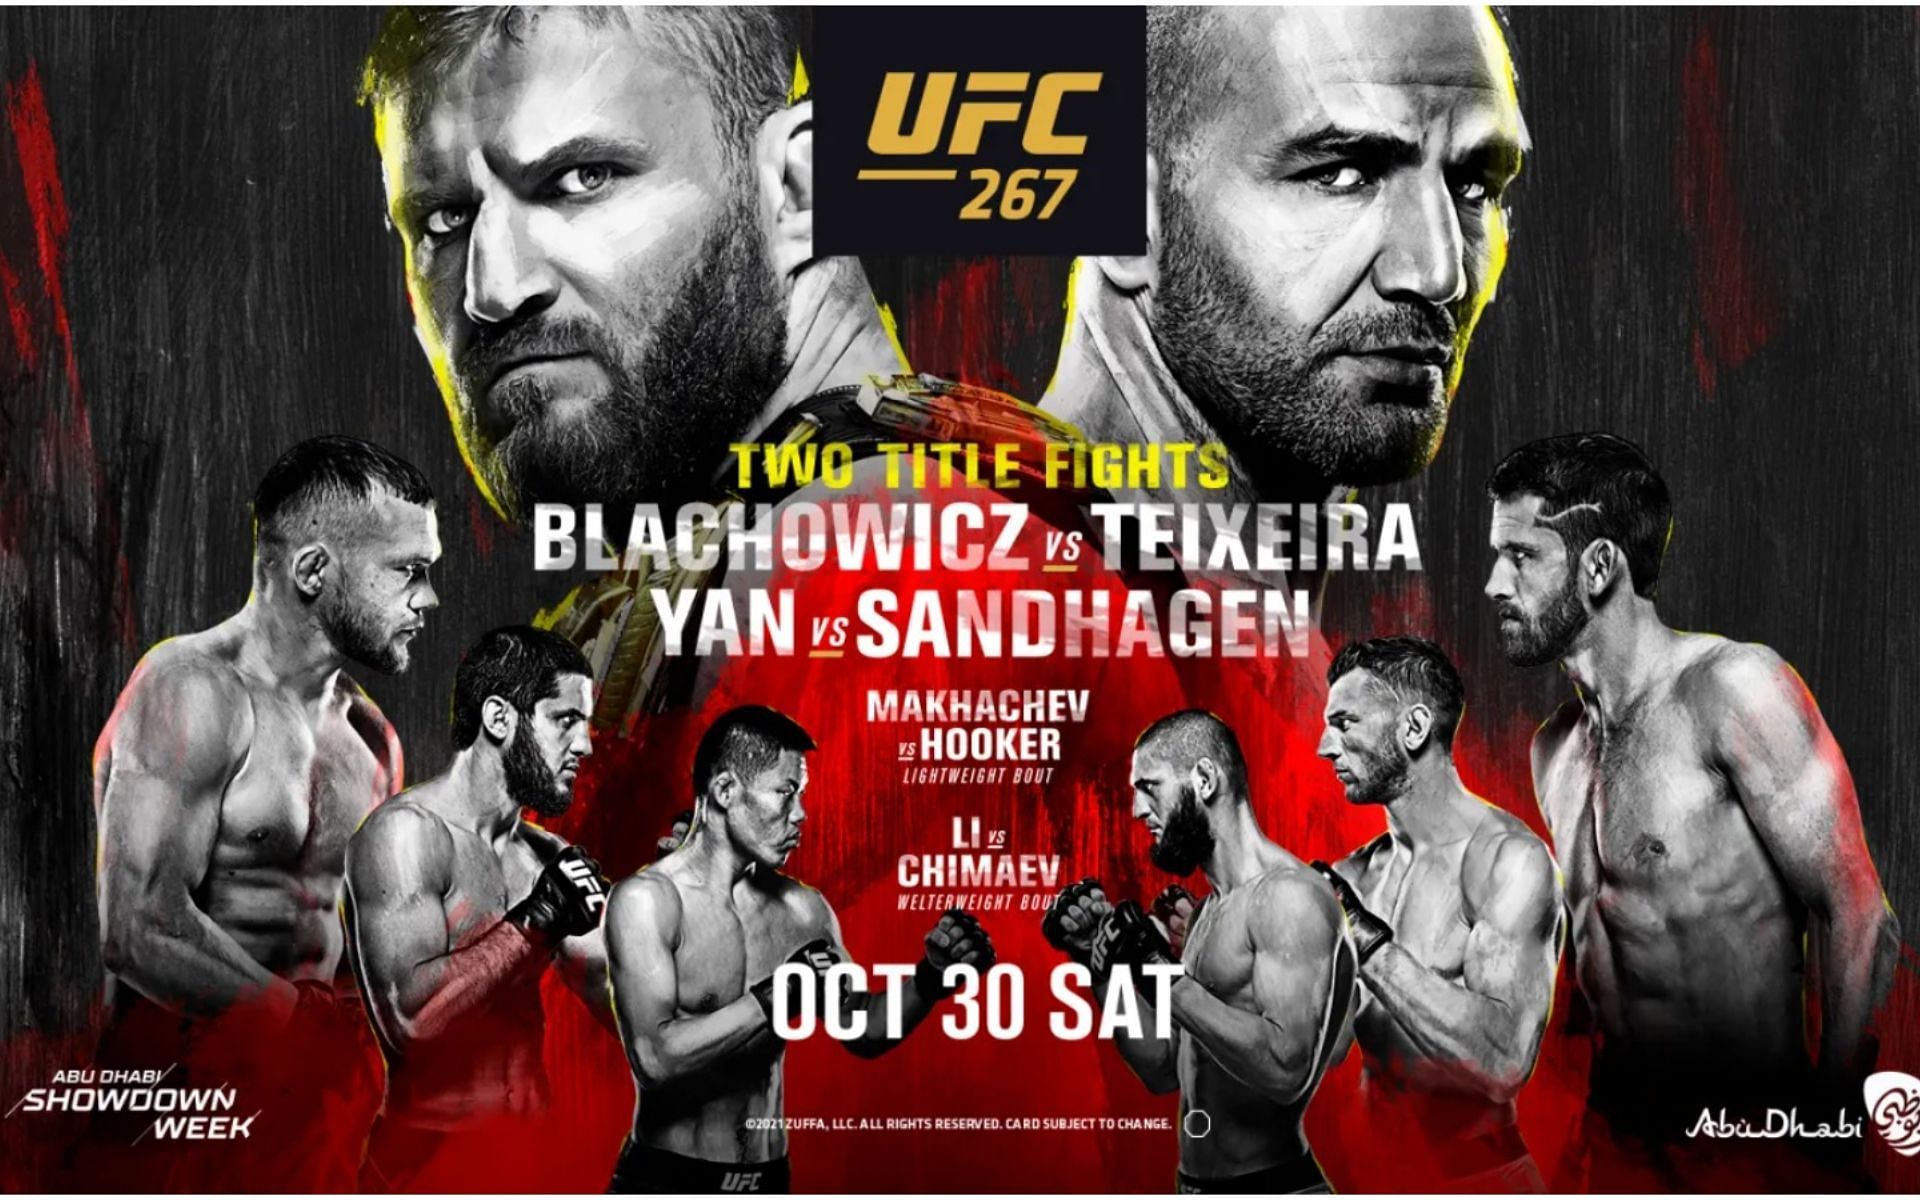 UFC 267 looks like one of the best events of 2021 thus far